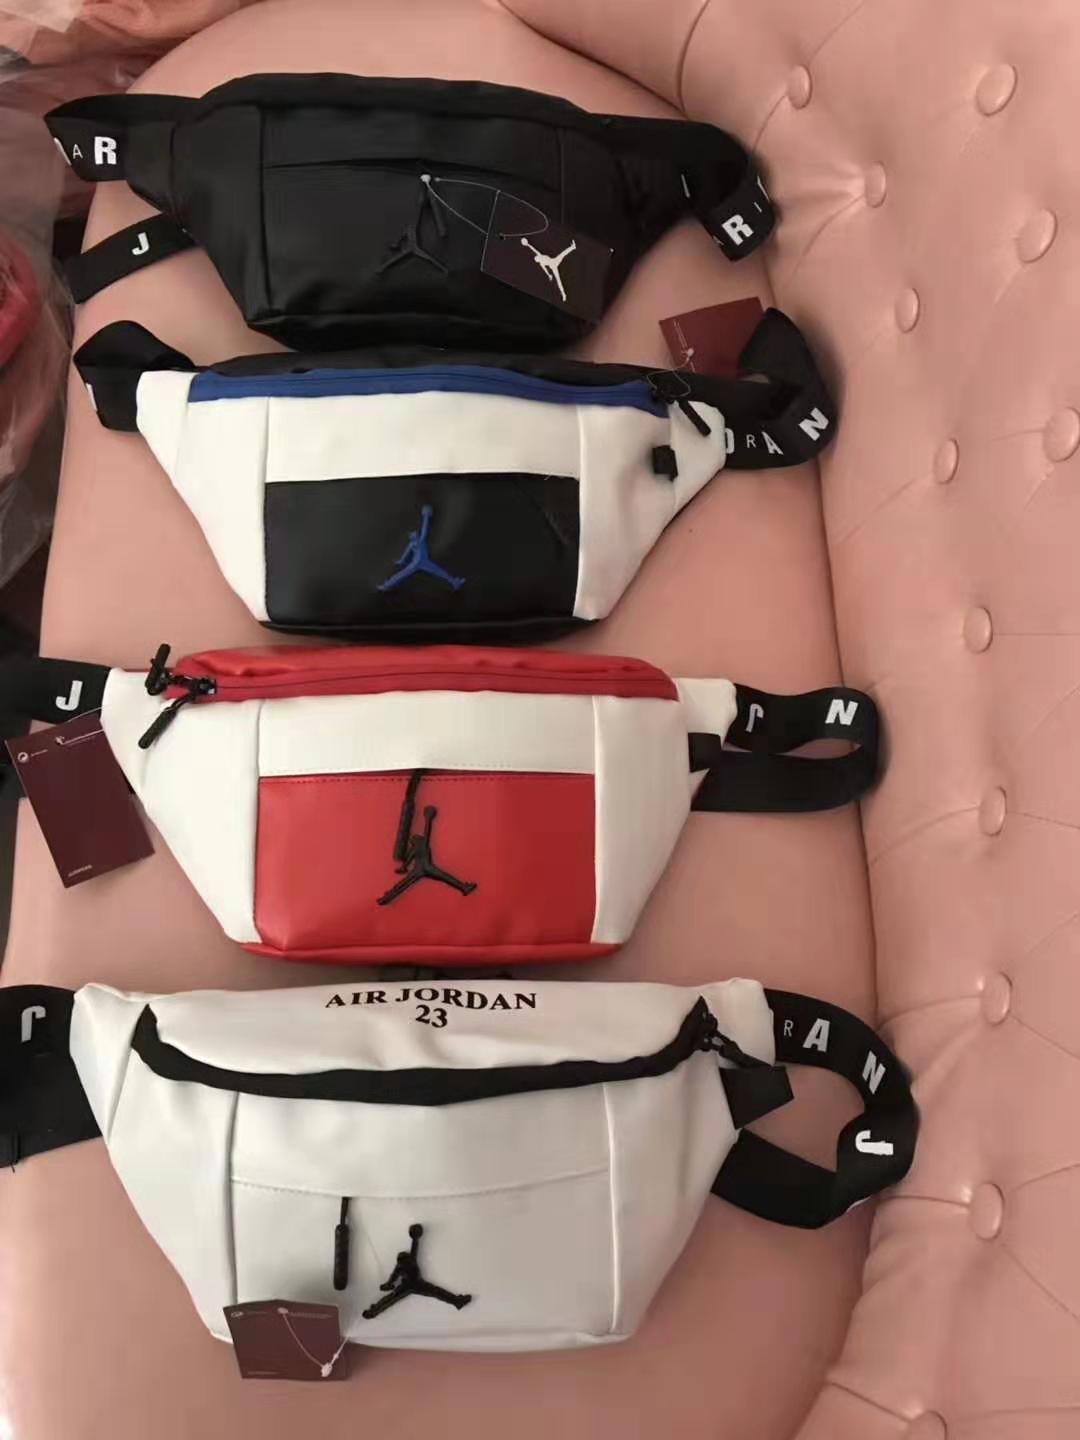 2019 Air Jordan Waistbag - Email me the color after placing the order